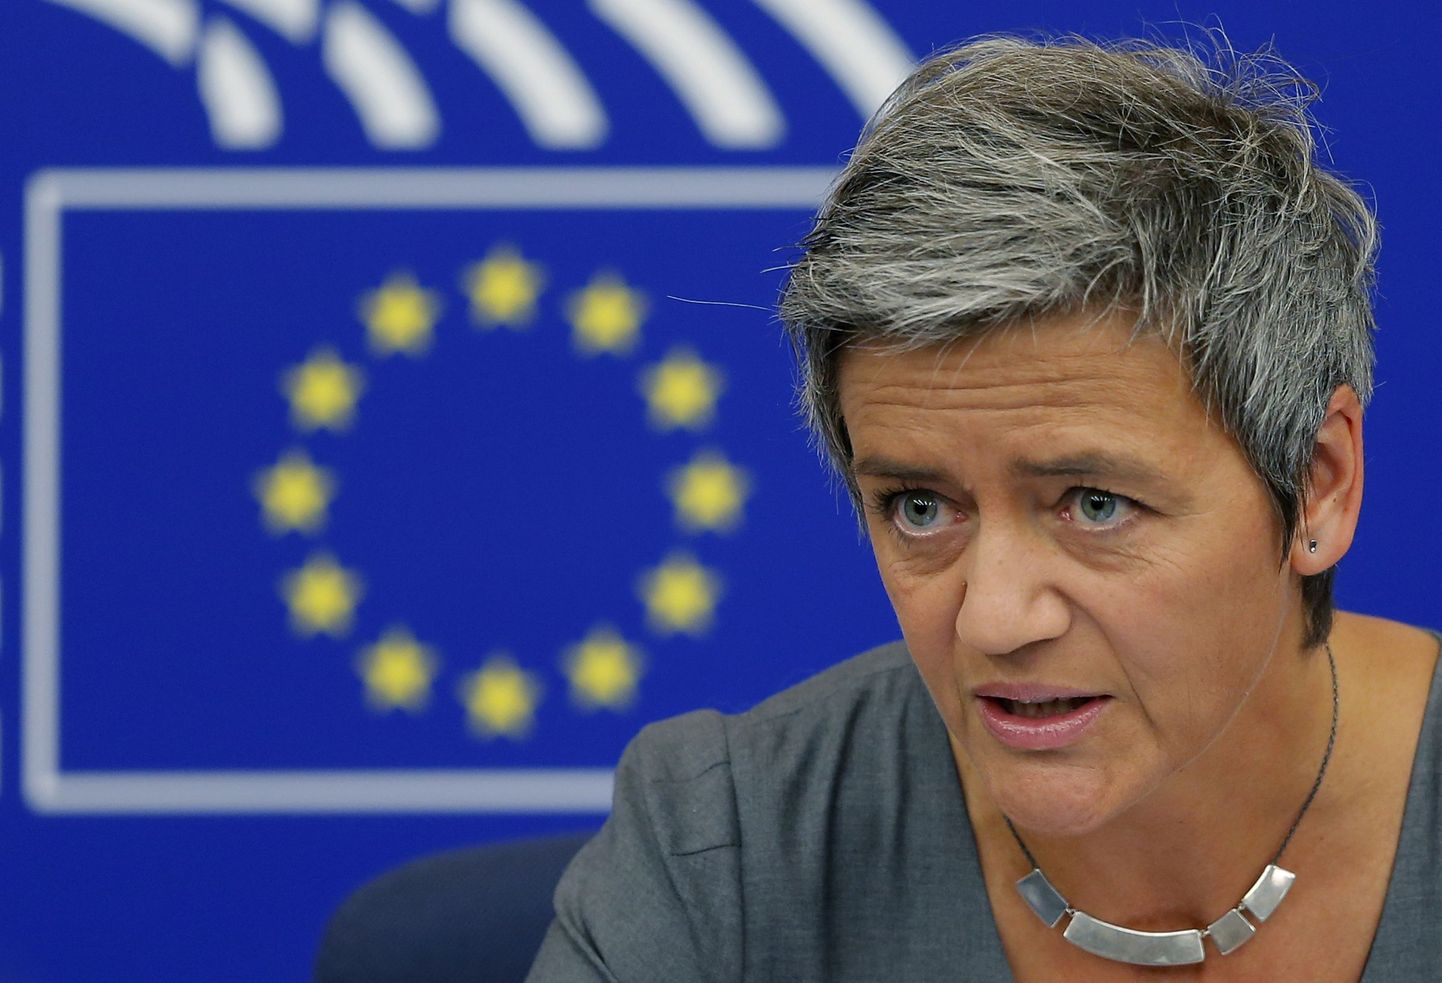 European Competition Commissioner Margrethe Vestager holds a news conference on the takeover of Alstom's power businesses by U.S. conglomerate General Electric at the European Parliament in Strasbourg, France, September 8, 2015. General Electric won European Union antitrust clearance on Tuesday to buy Alstom's power unit, its largest ever takeover. REUTERS/Vincent Kessler